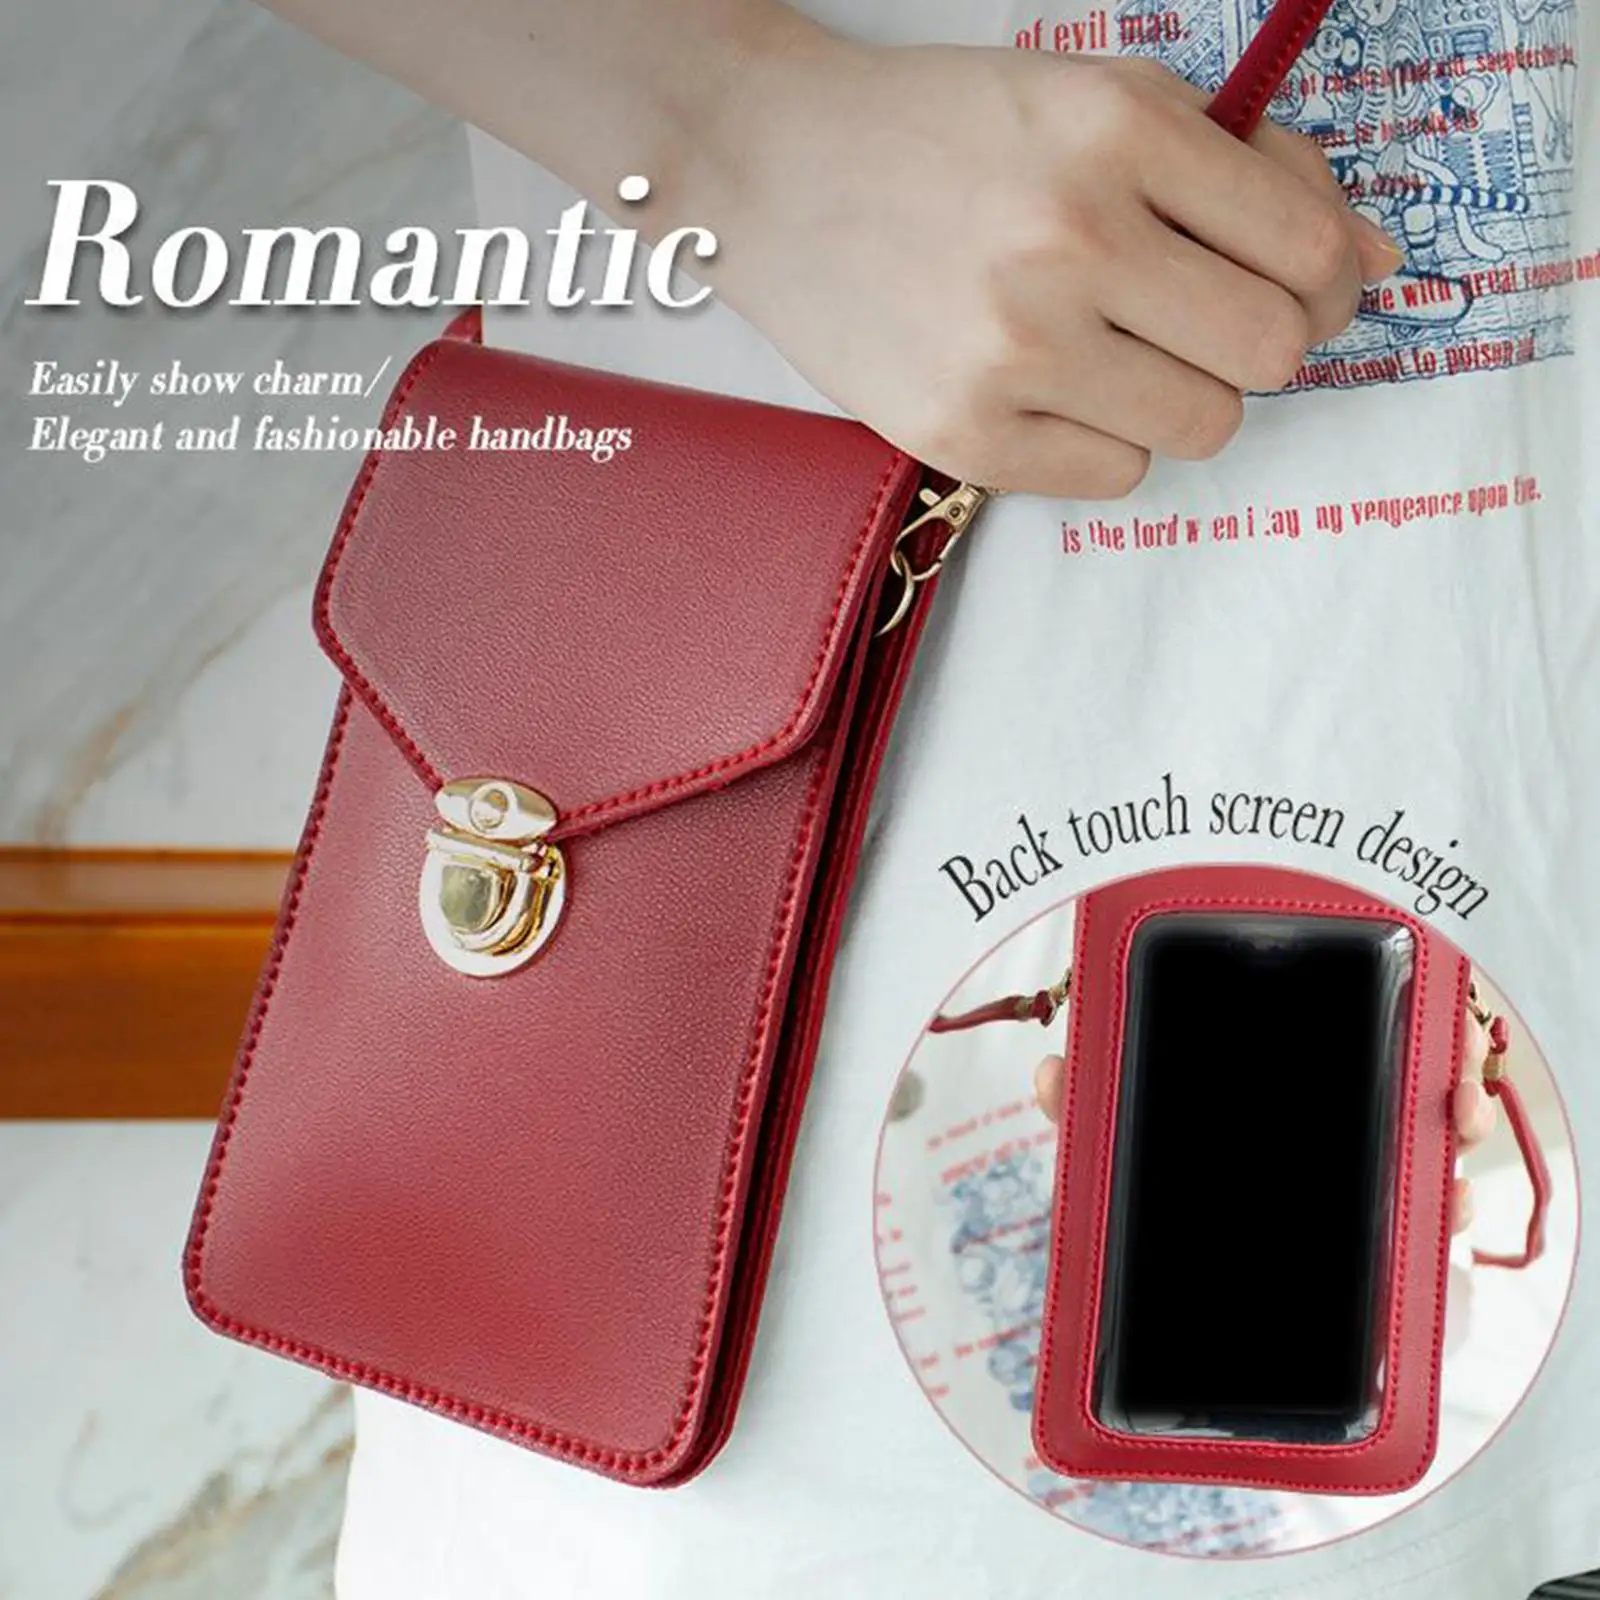 Touch Screen Purse, Fashion Crossbody with Shoulder Strap, Keeps Cash, s, Phone Screens Safe